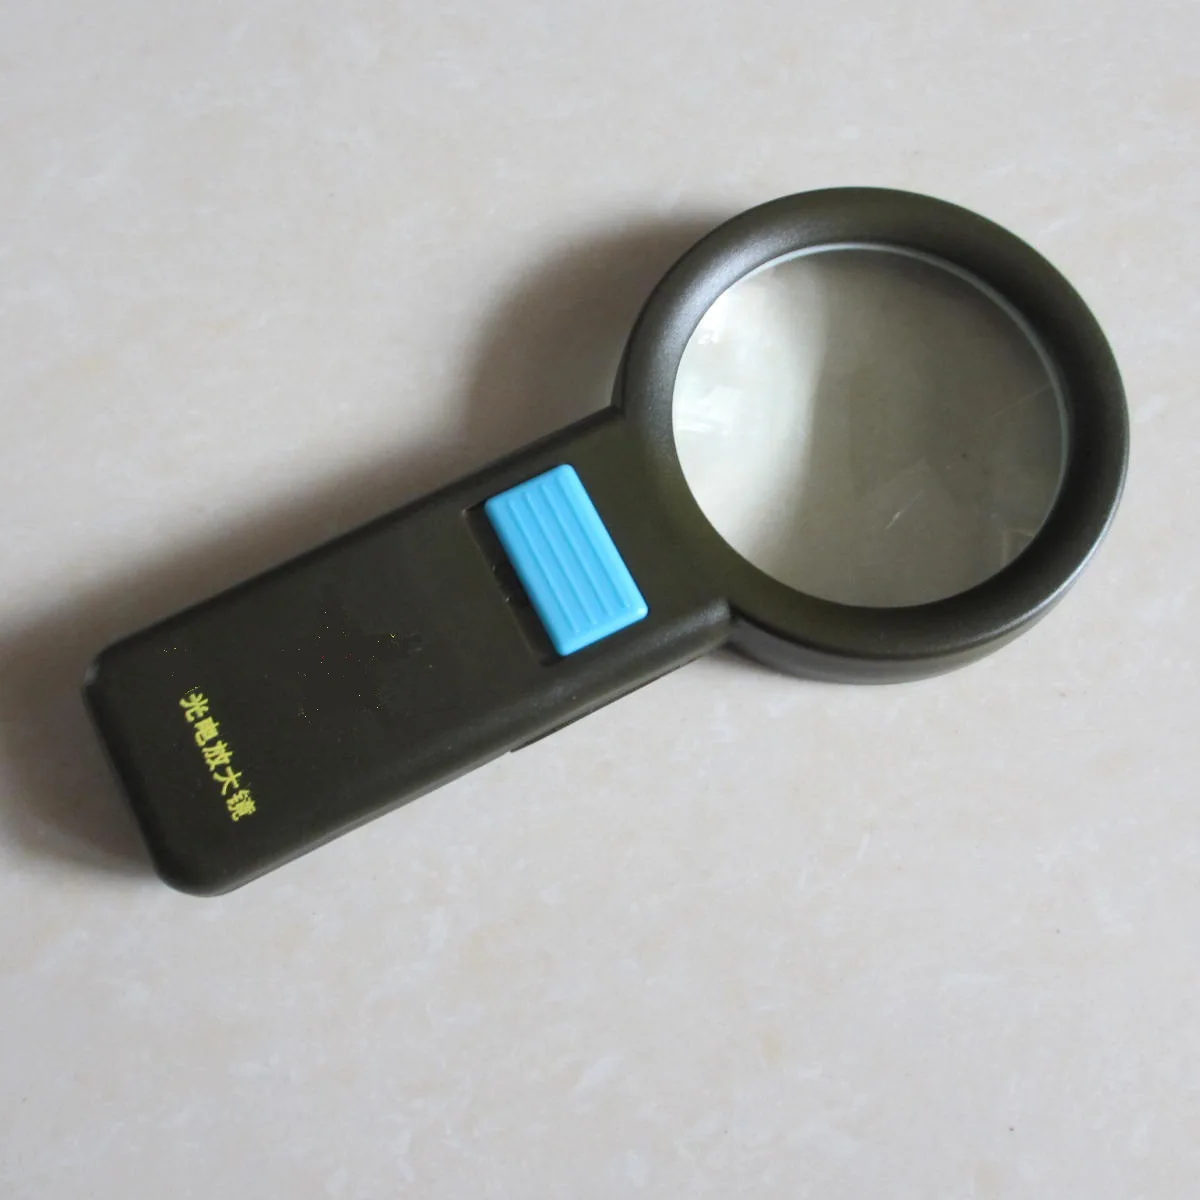 10x Handheld Magnifying Glass Portable Magnifier With Precision